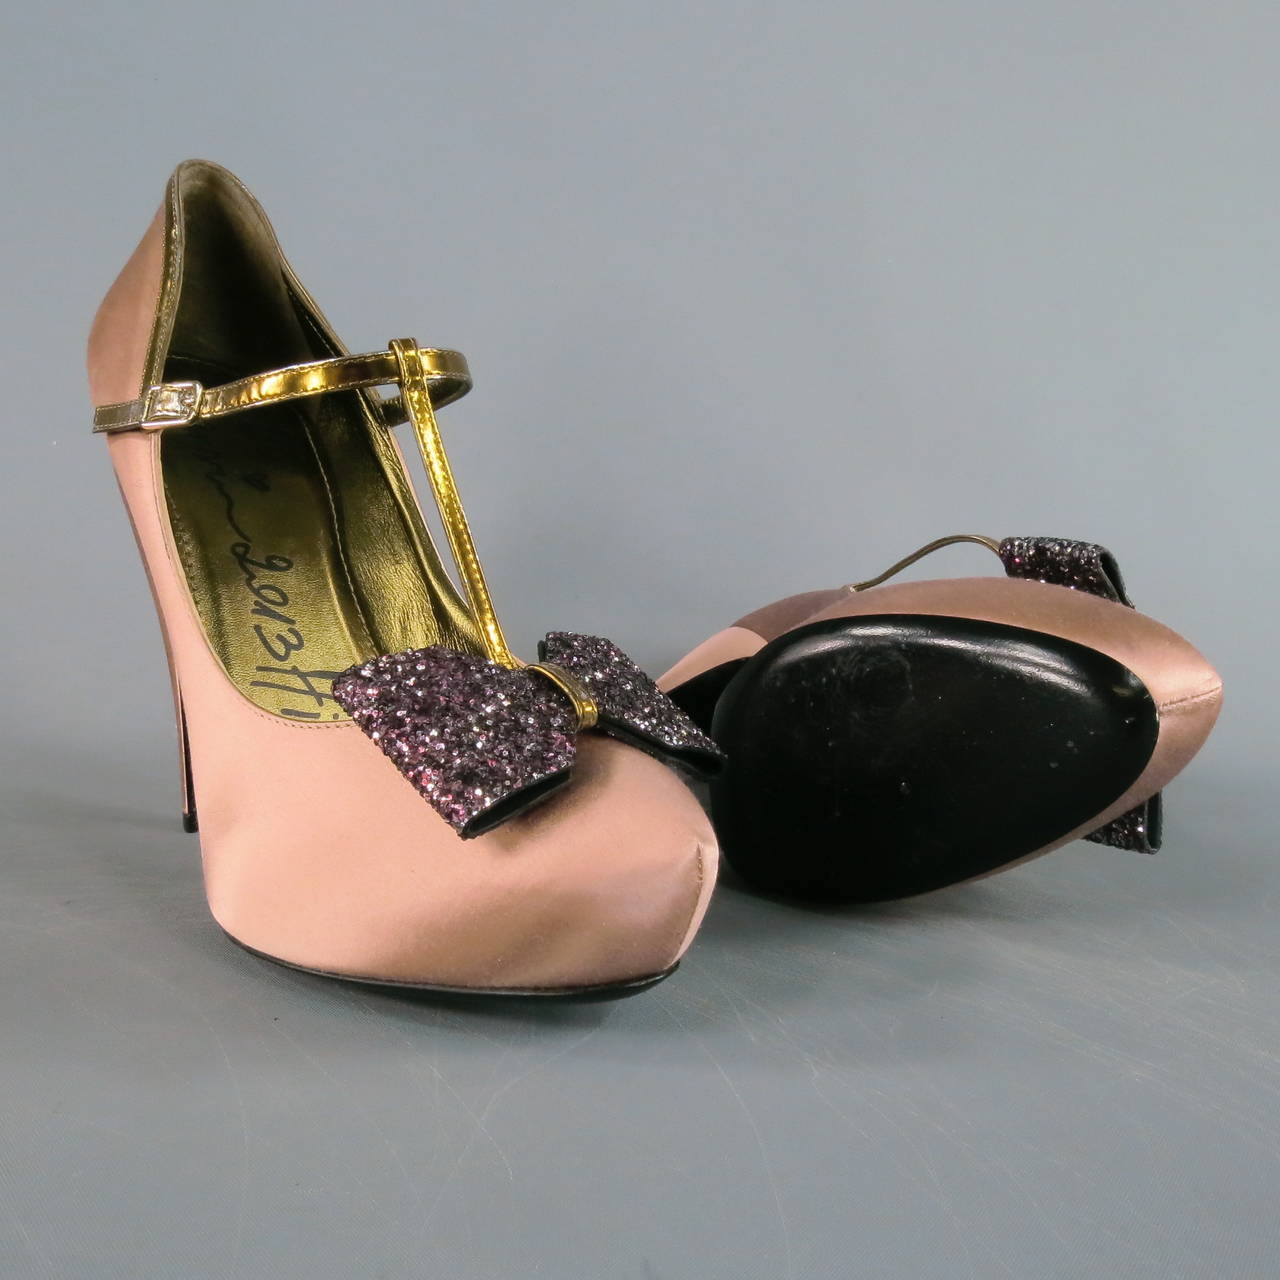 Angular platform pumps by LANVIN. A fabulous style featuring a concealed platform and thick stiletto heel covered in dusty rose pink satin, metallic gold leather T strap with matching piping, and glitter bow embellishment. Fun and girly yet high